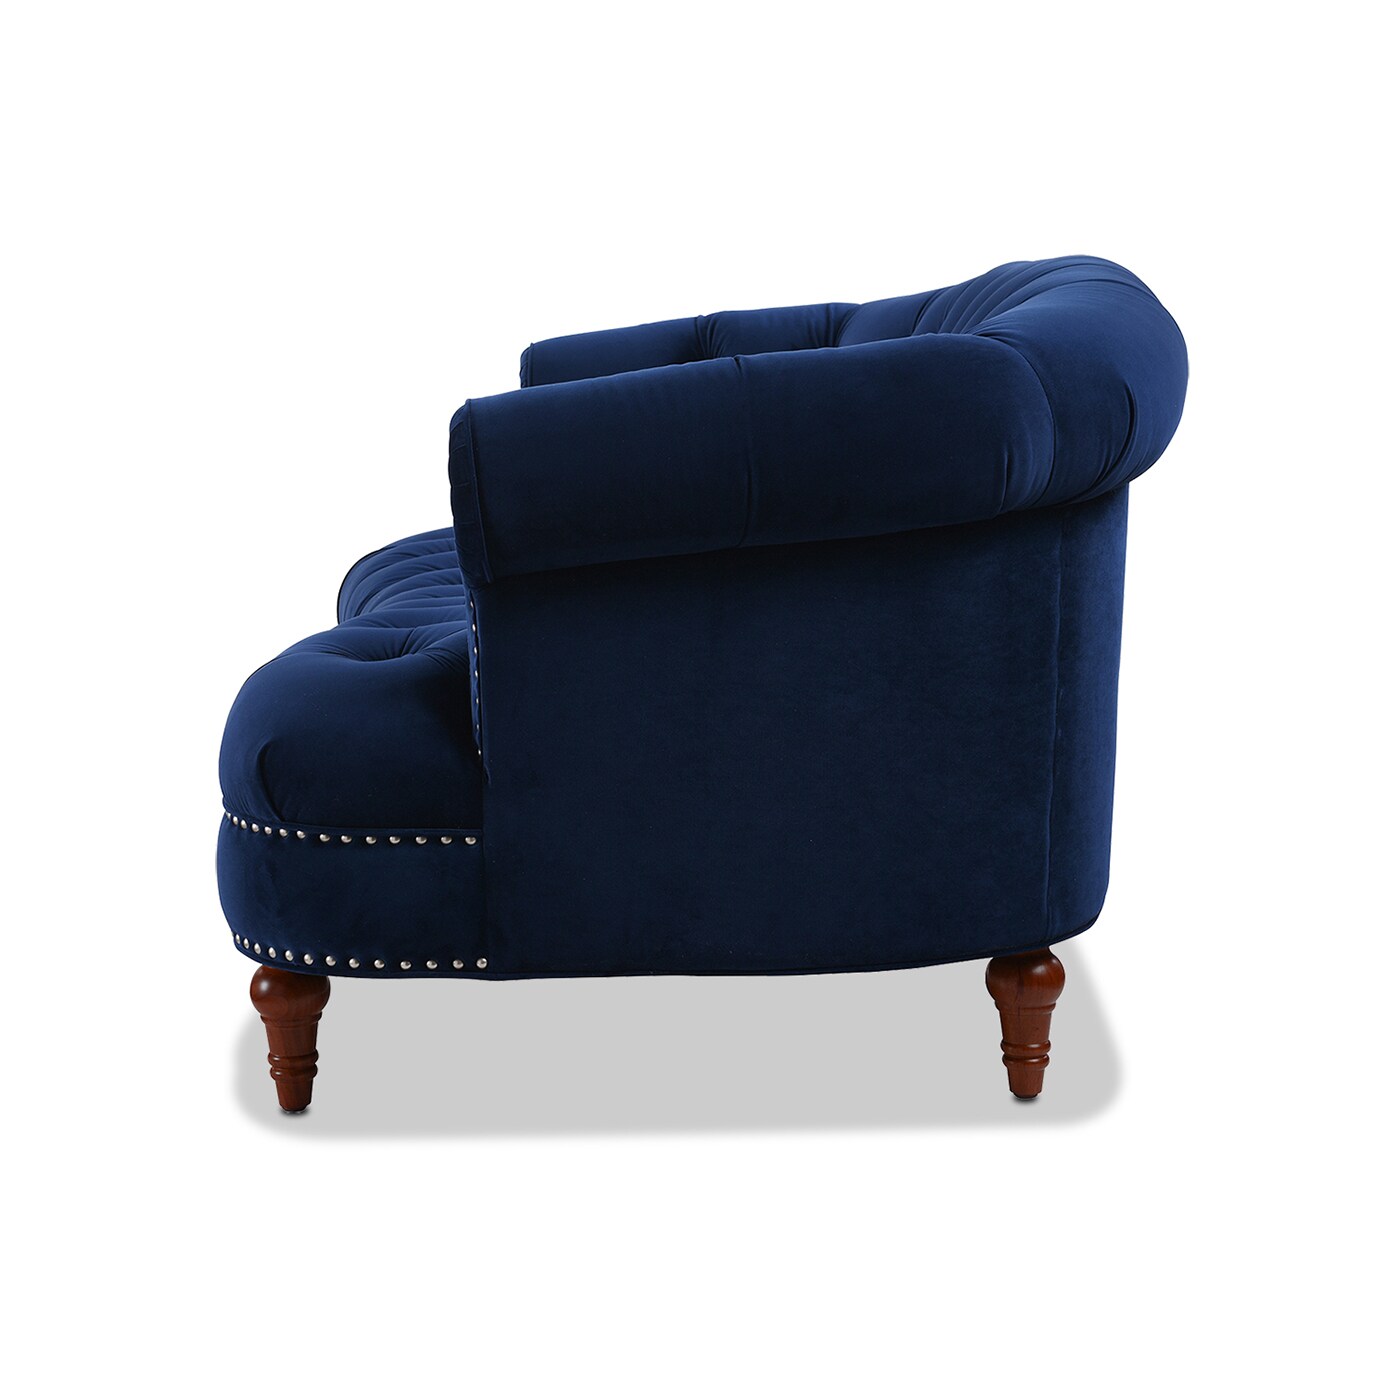 La Rosa Loveseats Home the Velvet department in Midcentury Blue 68.5-in Taylor Sofas Couches, 2-seater at & Navy Loveseat Jennifer